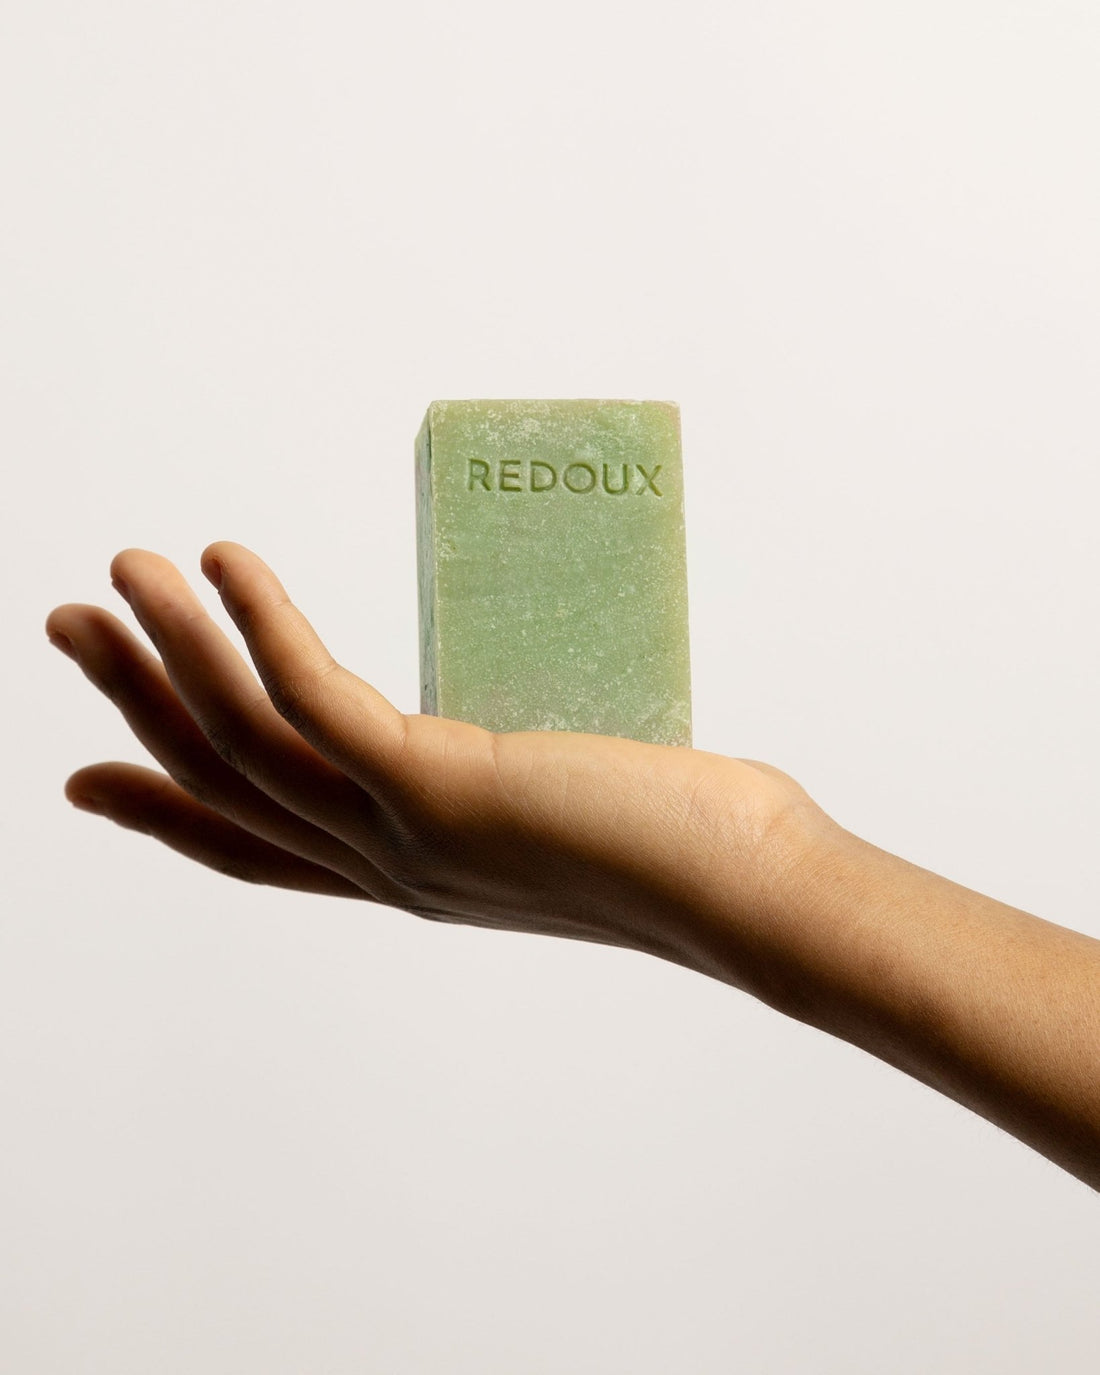 7 Soap Dishes for Your Redoux Bar - Redoux